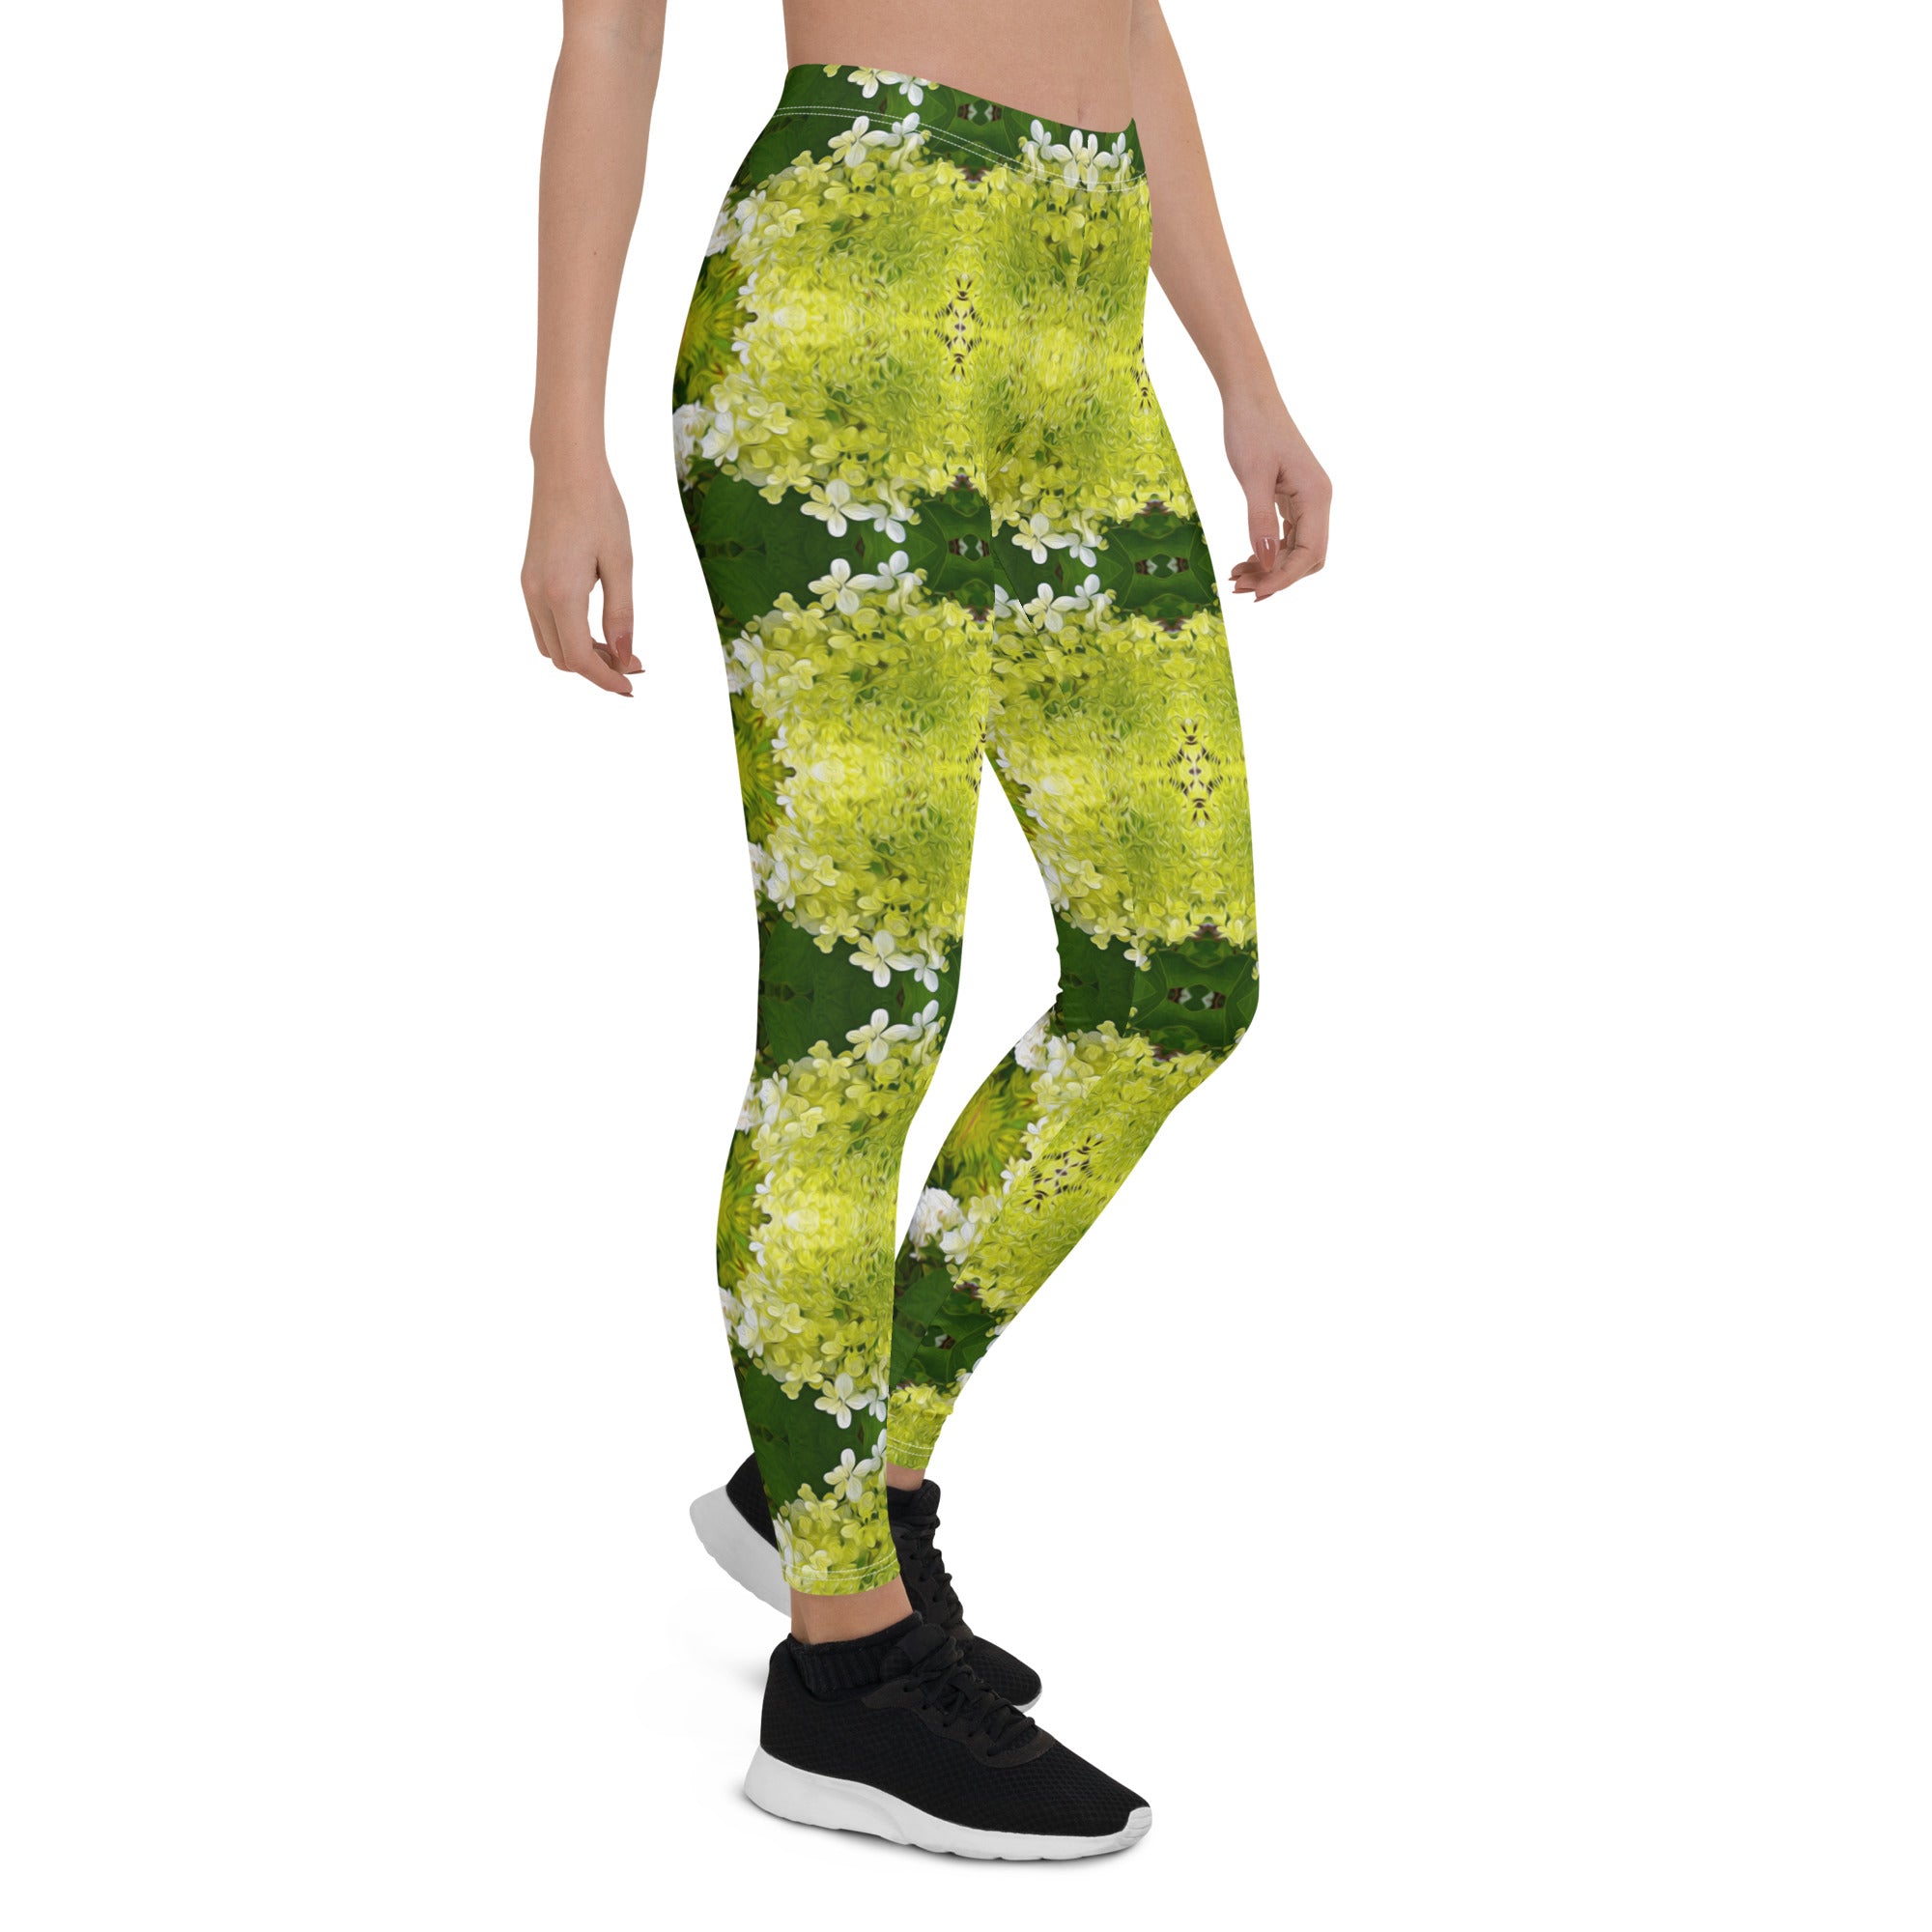 Leggings for Women, Chartreuse Green Abstract Hydrangea Blooms Pattern